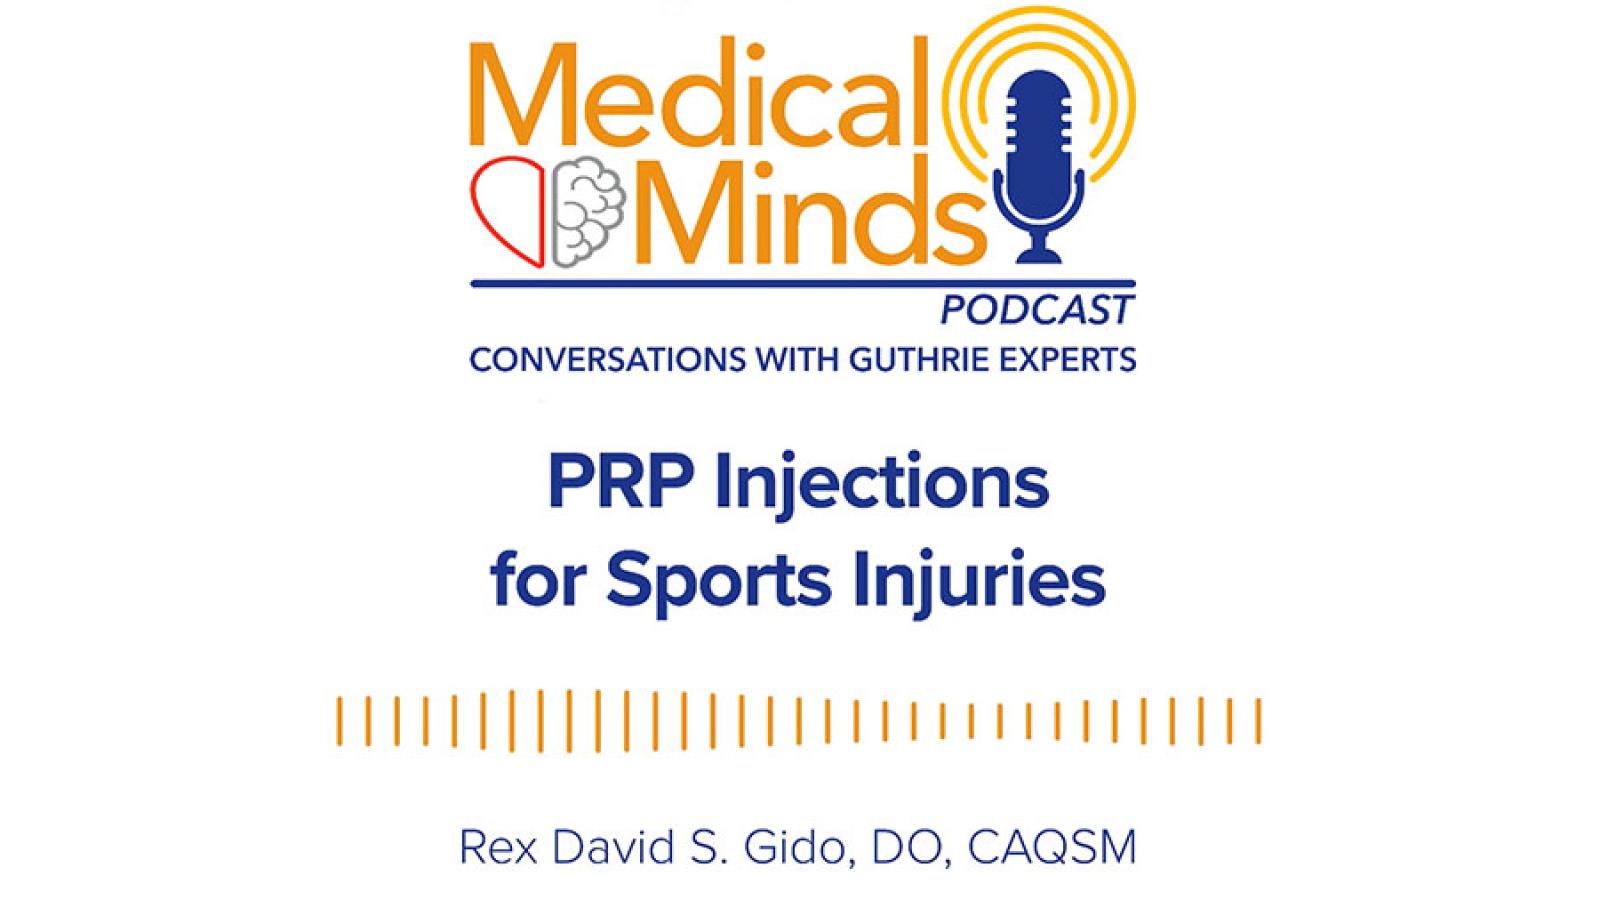 PRP Injections for Sports Injuries